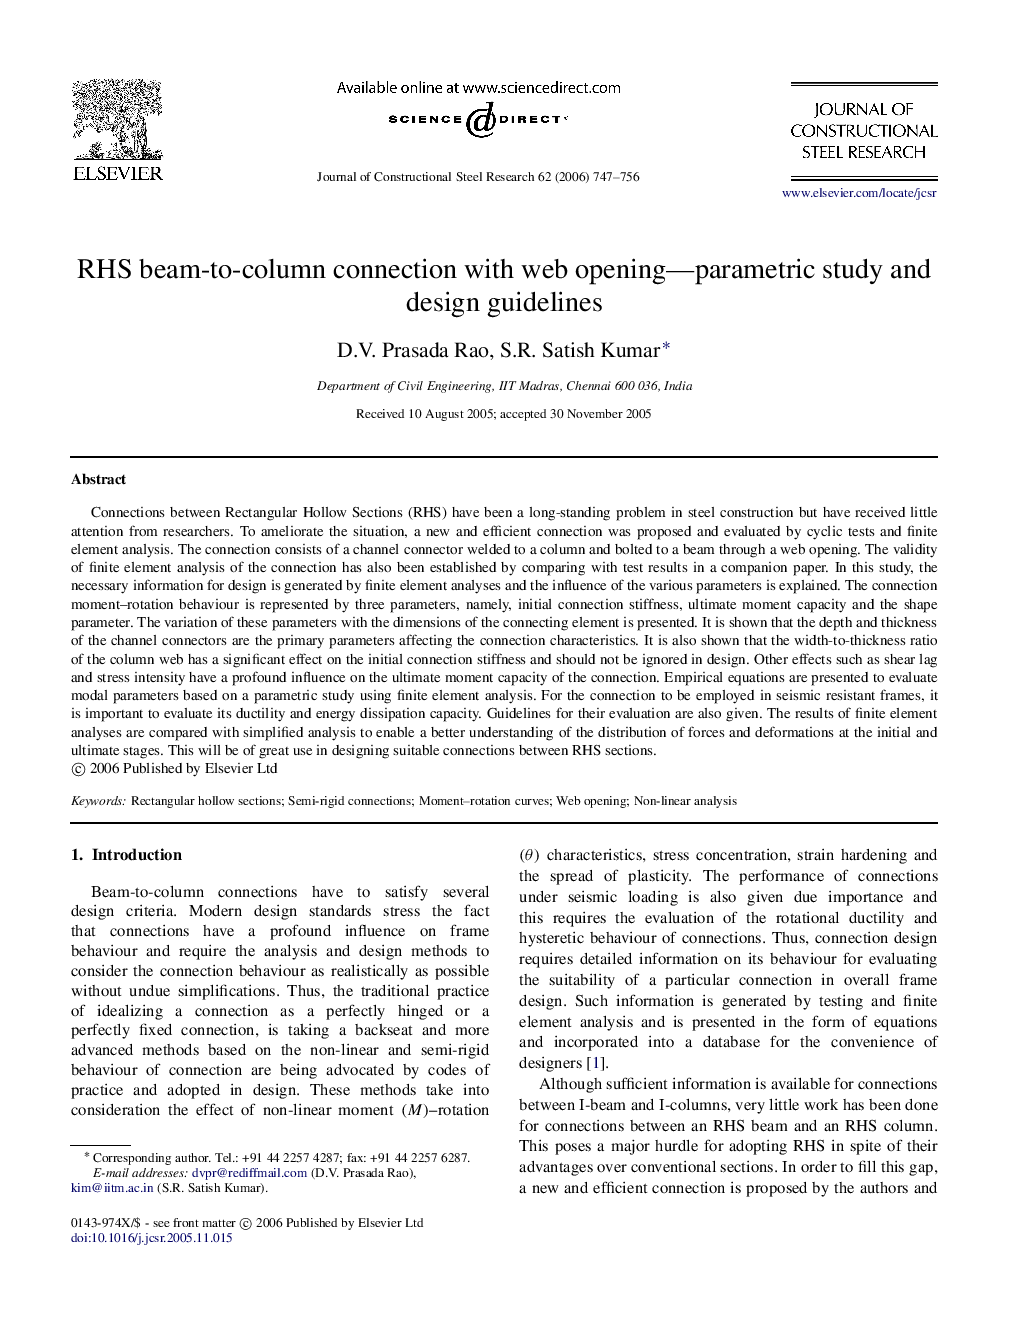 RHS beam-to-column connection with web opening—parametric study and design guidelines